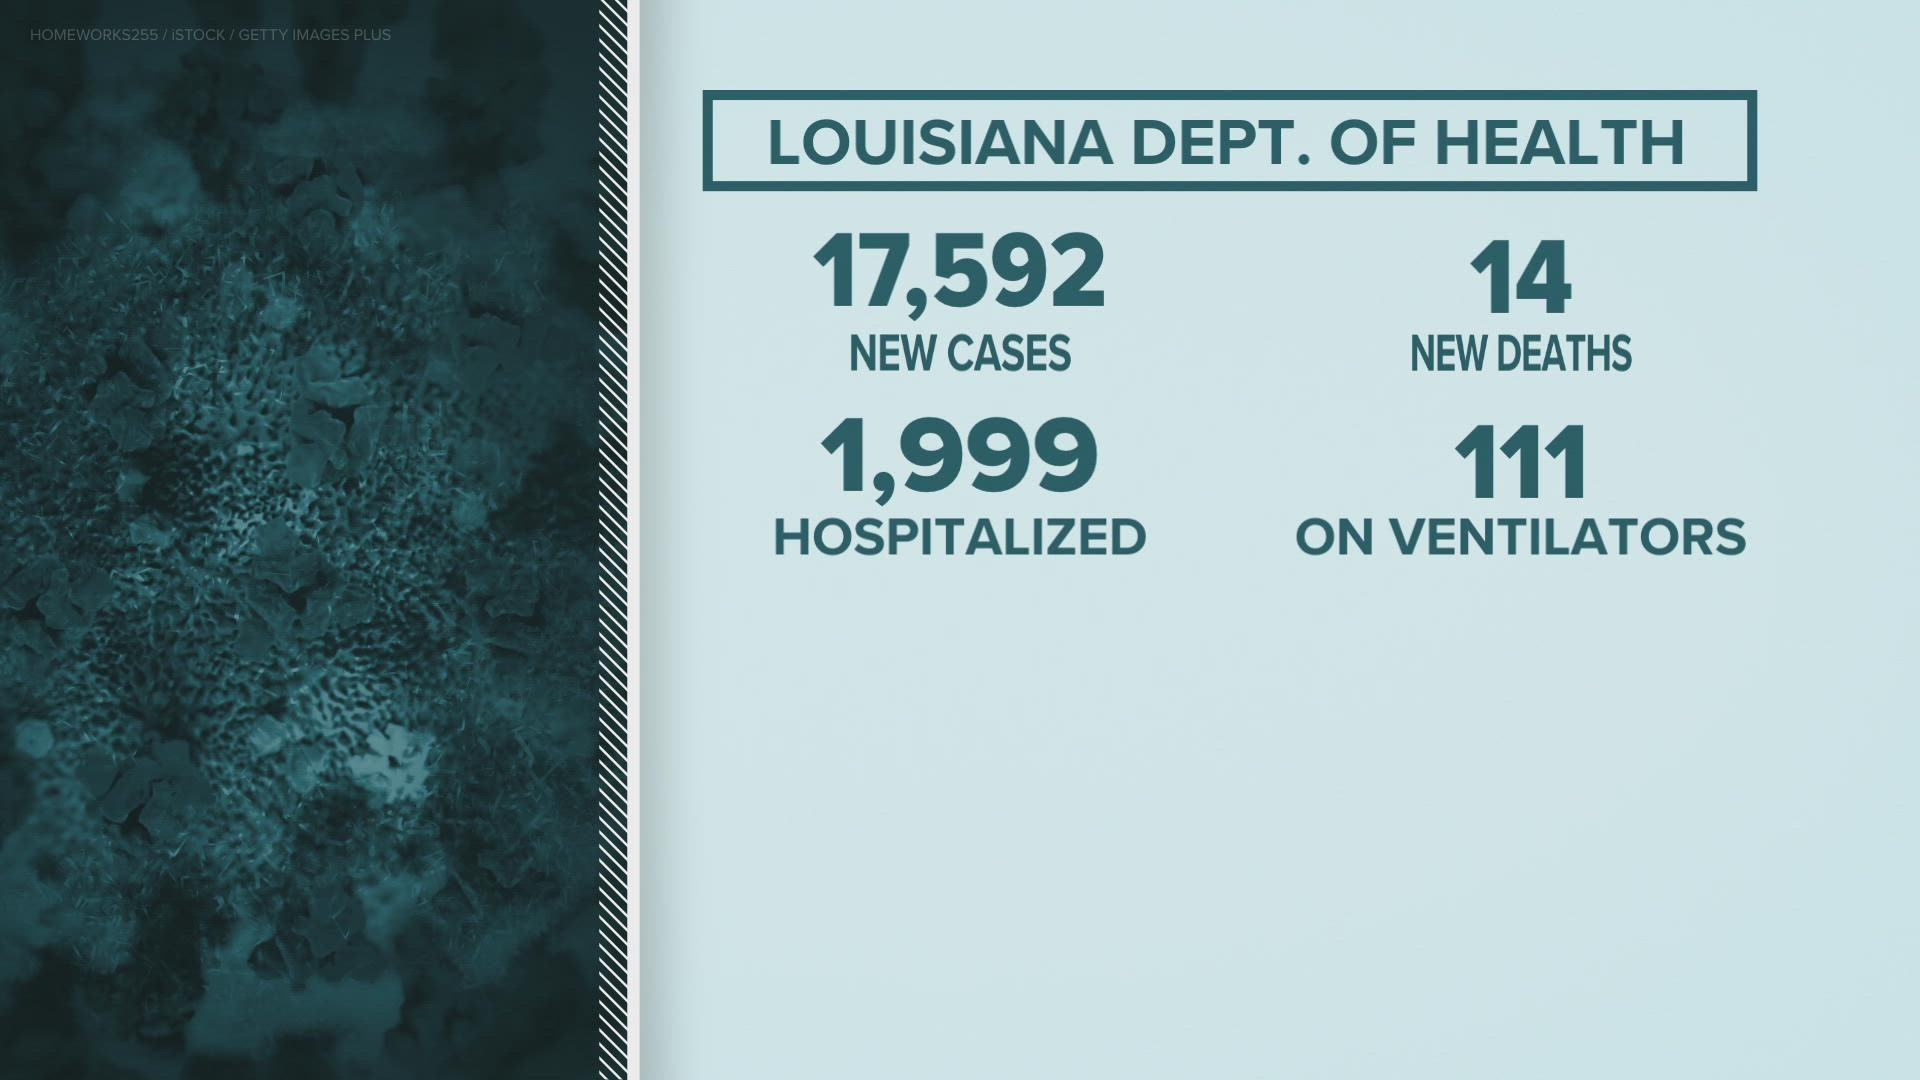 Louisiana also reported that 14 more people have died.